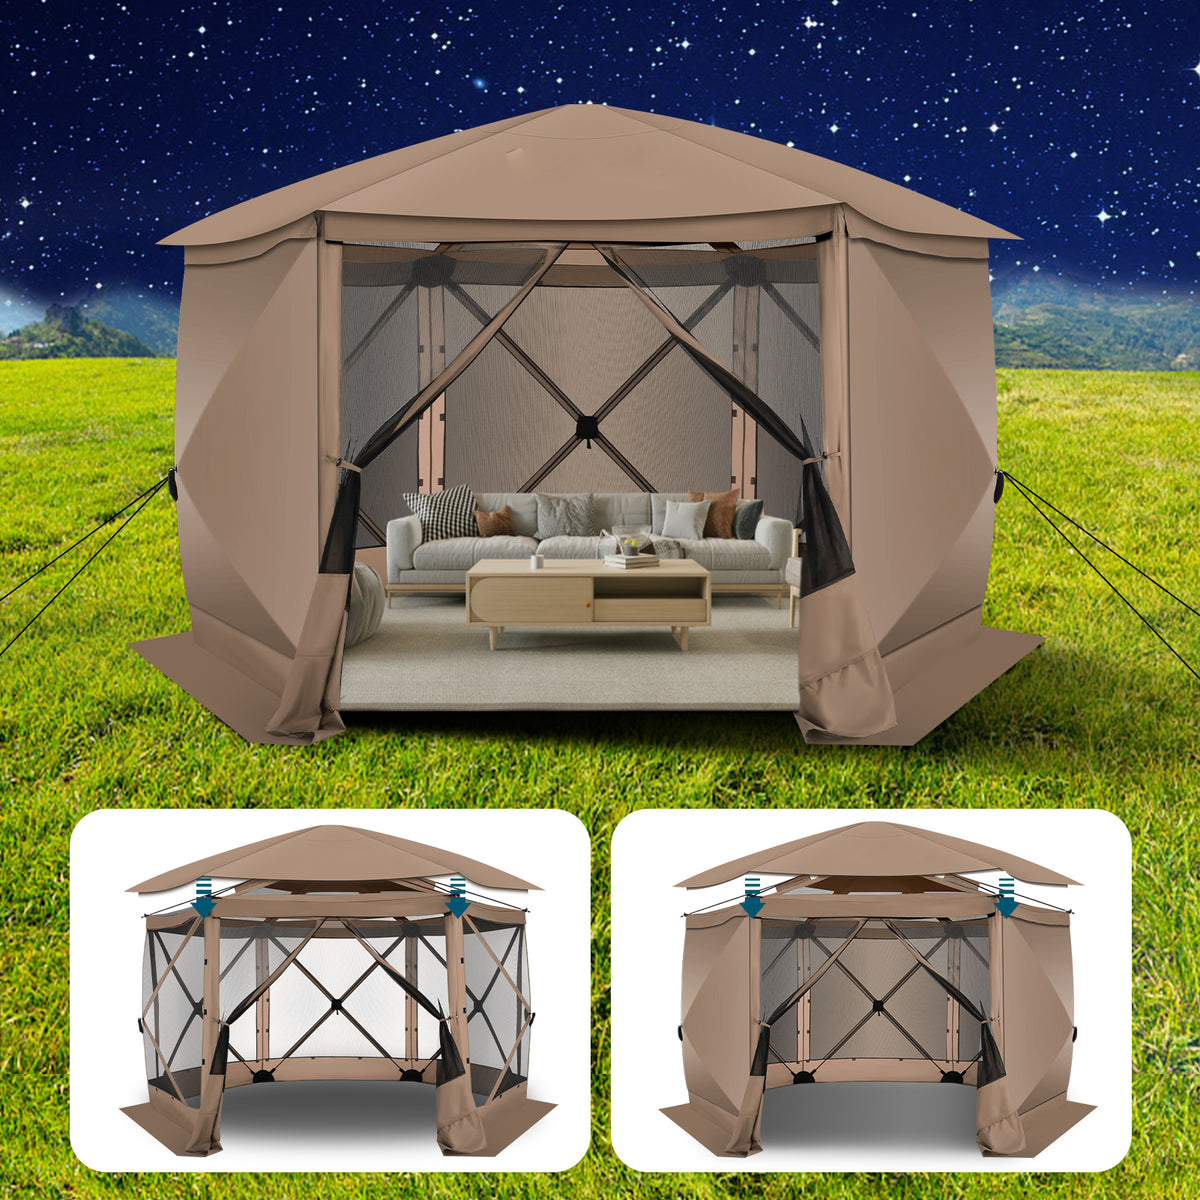 HOTEEL 12x12ft Camping Gazebo Screen Tent, 6 Sided Pop-up Canopy Shelter Tent with Mesh Windows, Portable Carry Bag, Stakes, Waterproof, UV 50+, Large Shade Tents for Outdoor Camping, Backyard, Beige